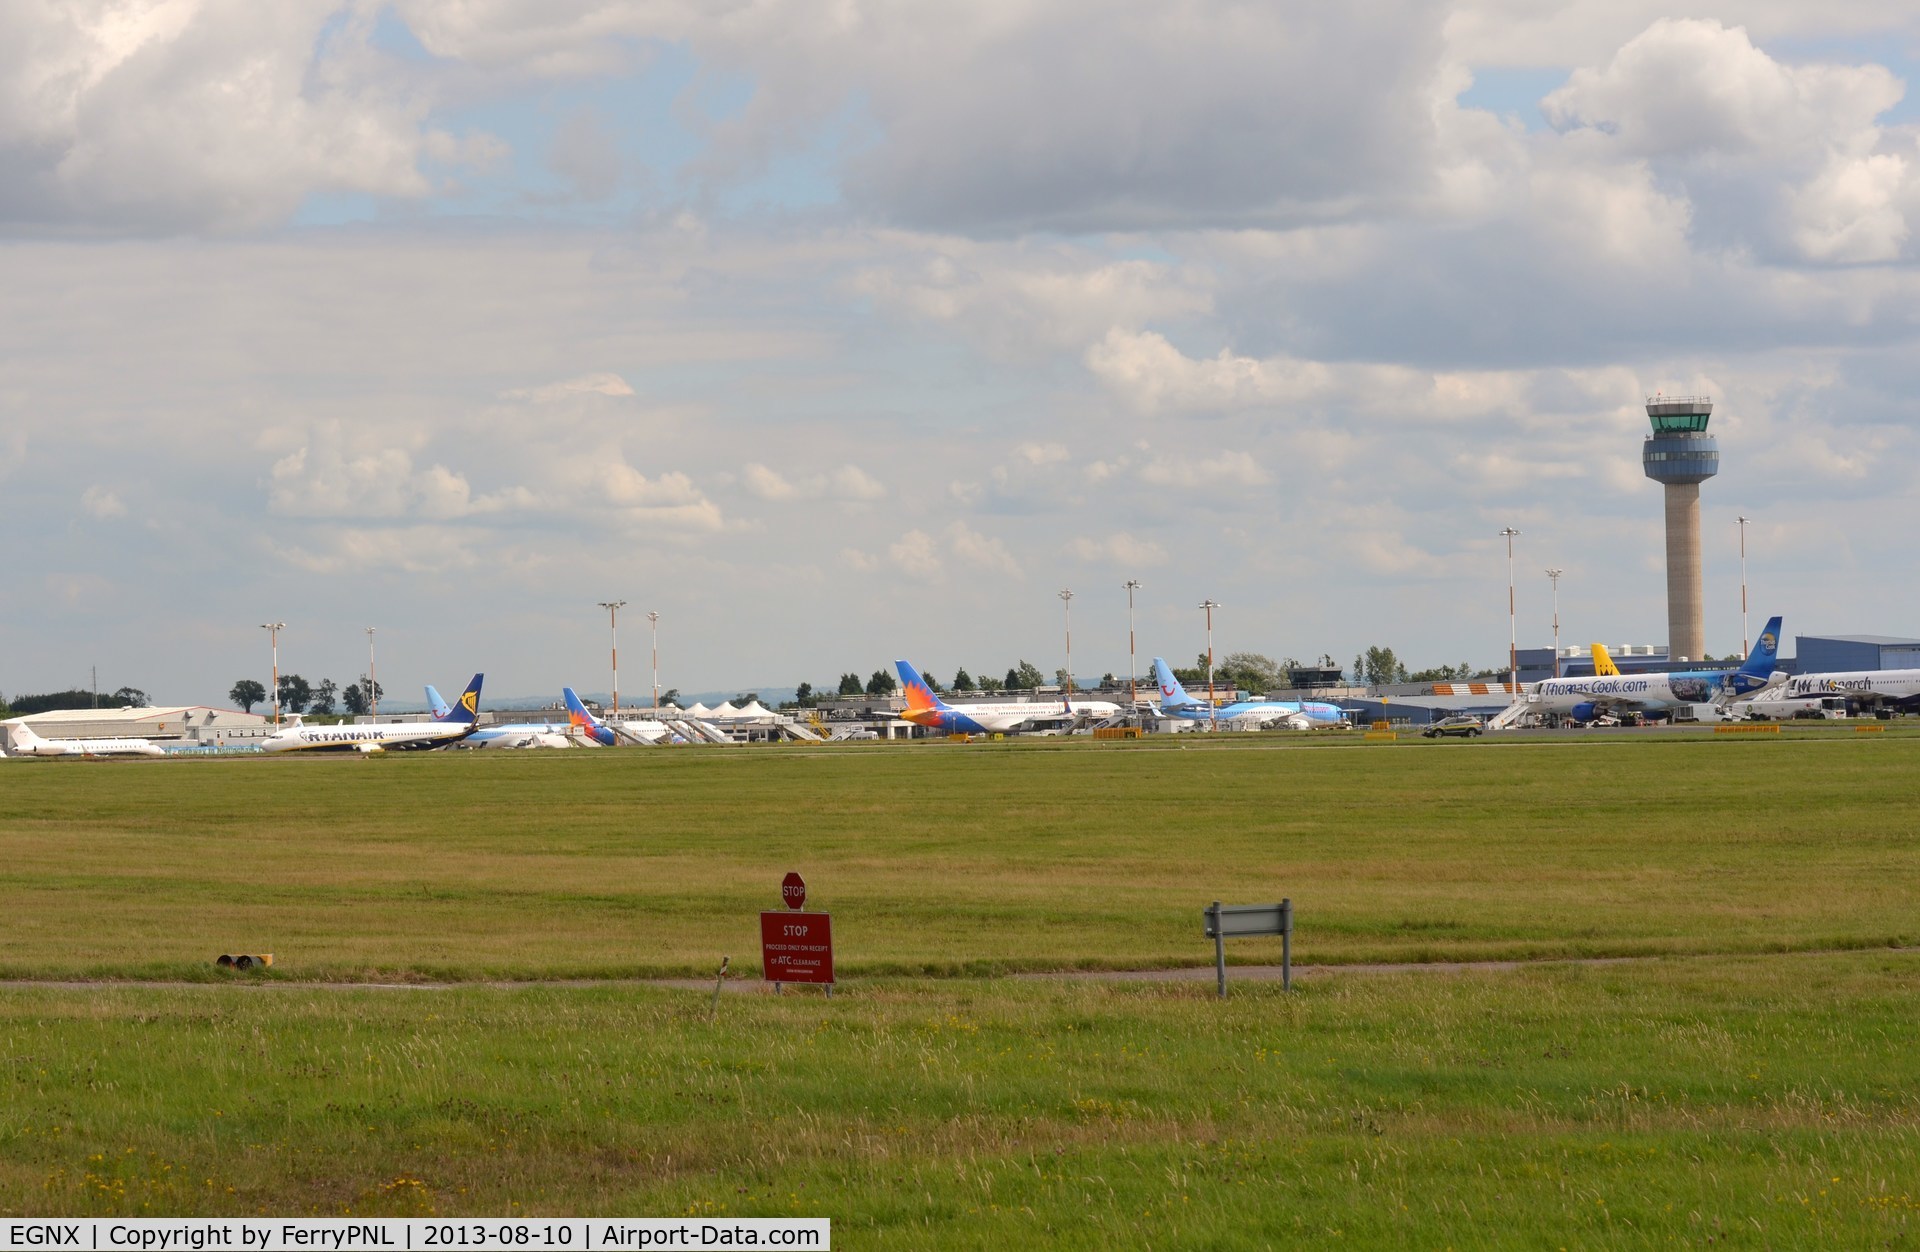 Nottingham East Midlands Airport, East Midlands, England United Kingdom (EGNX) - Overview of the EMA passenger terminal on a Saterday afternoon.